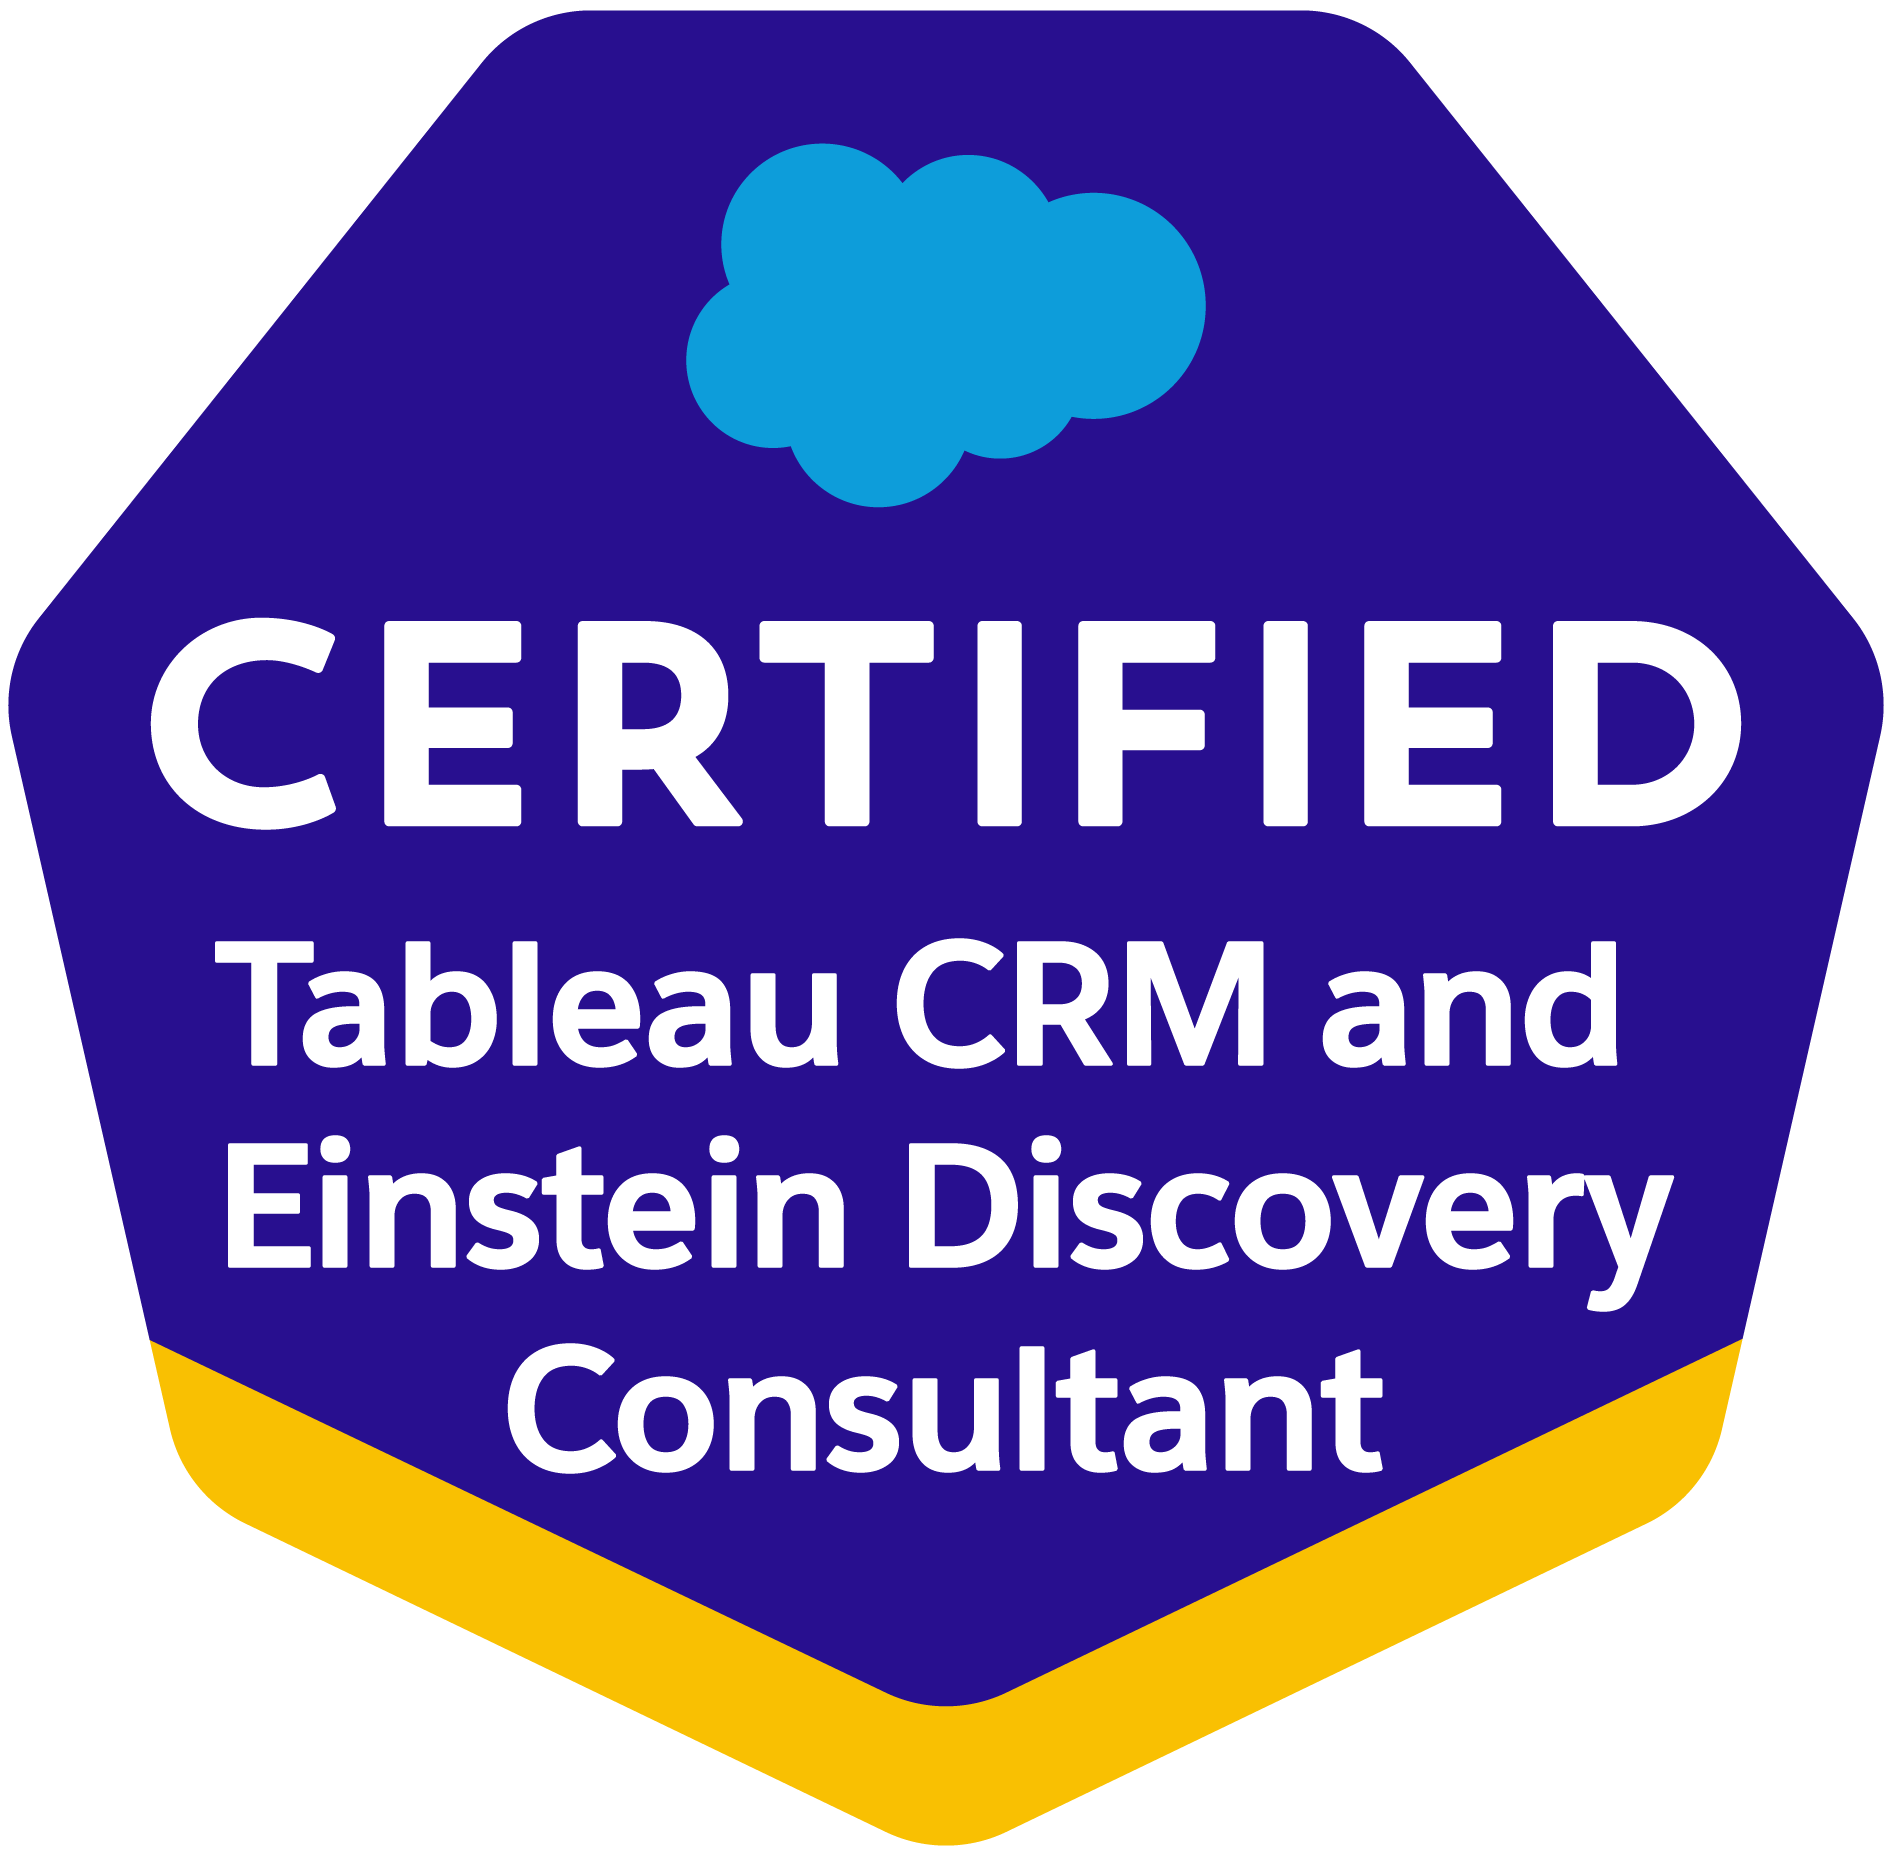 Certification Logo *Certified Tableau CRM and Einstein Discovery Consultant